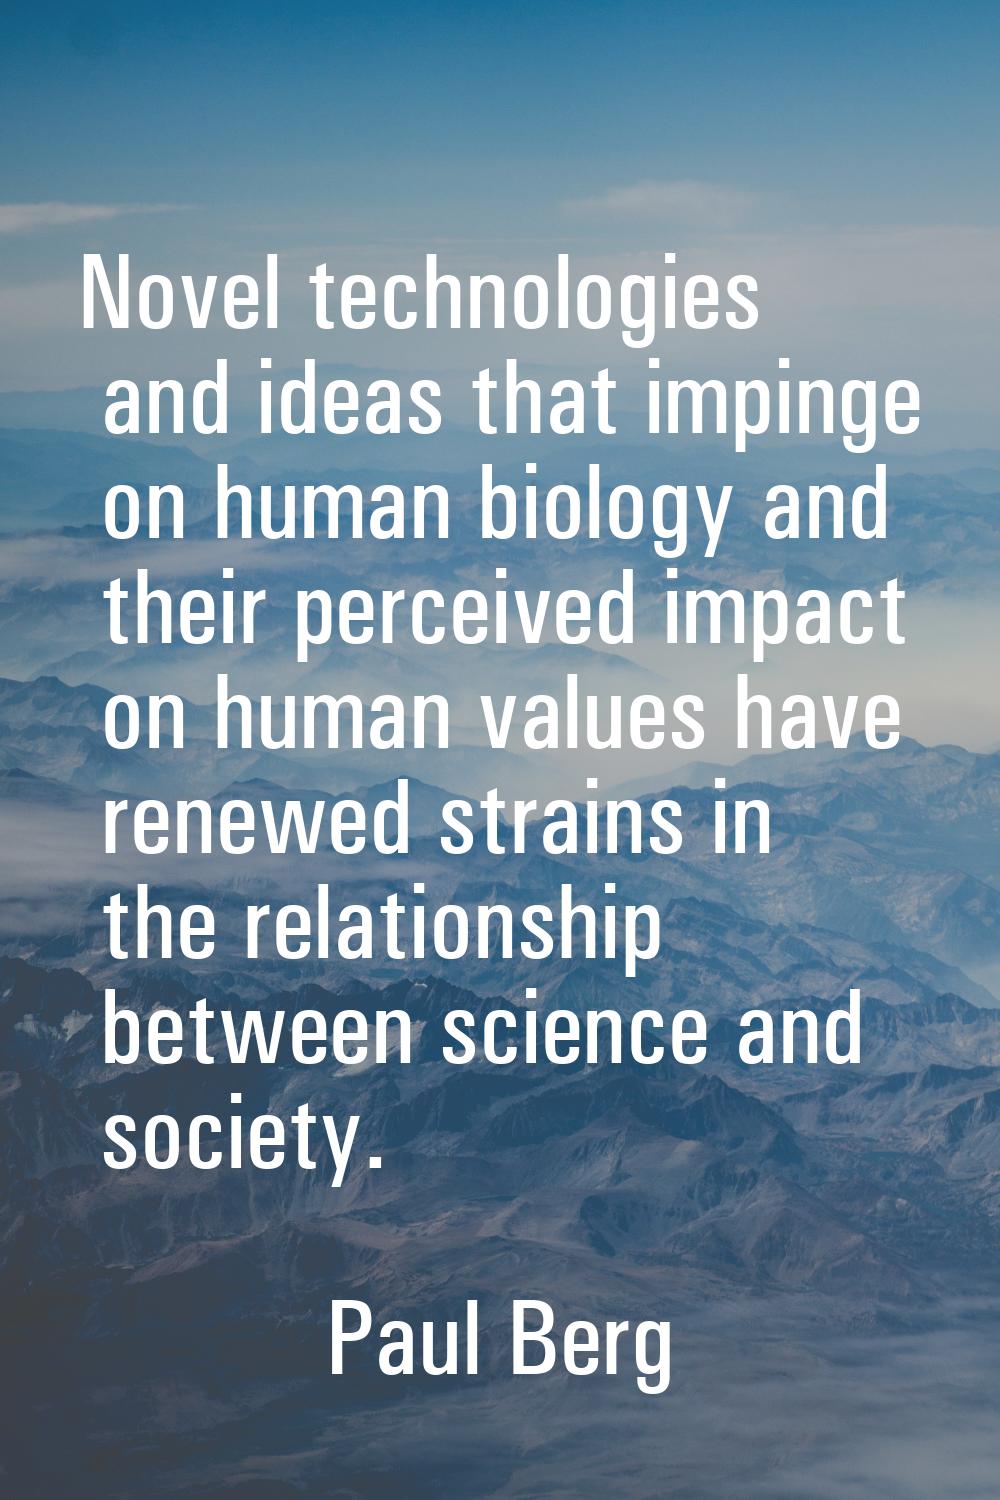 Novel technologies and ideas that impinge on human biology and their perceived impact on human valu